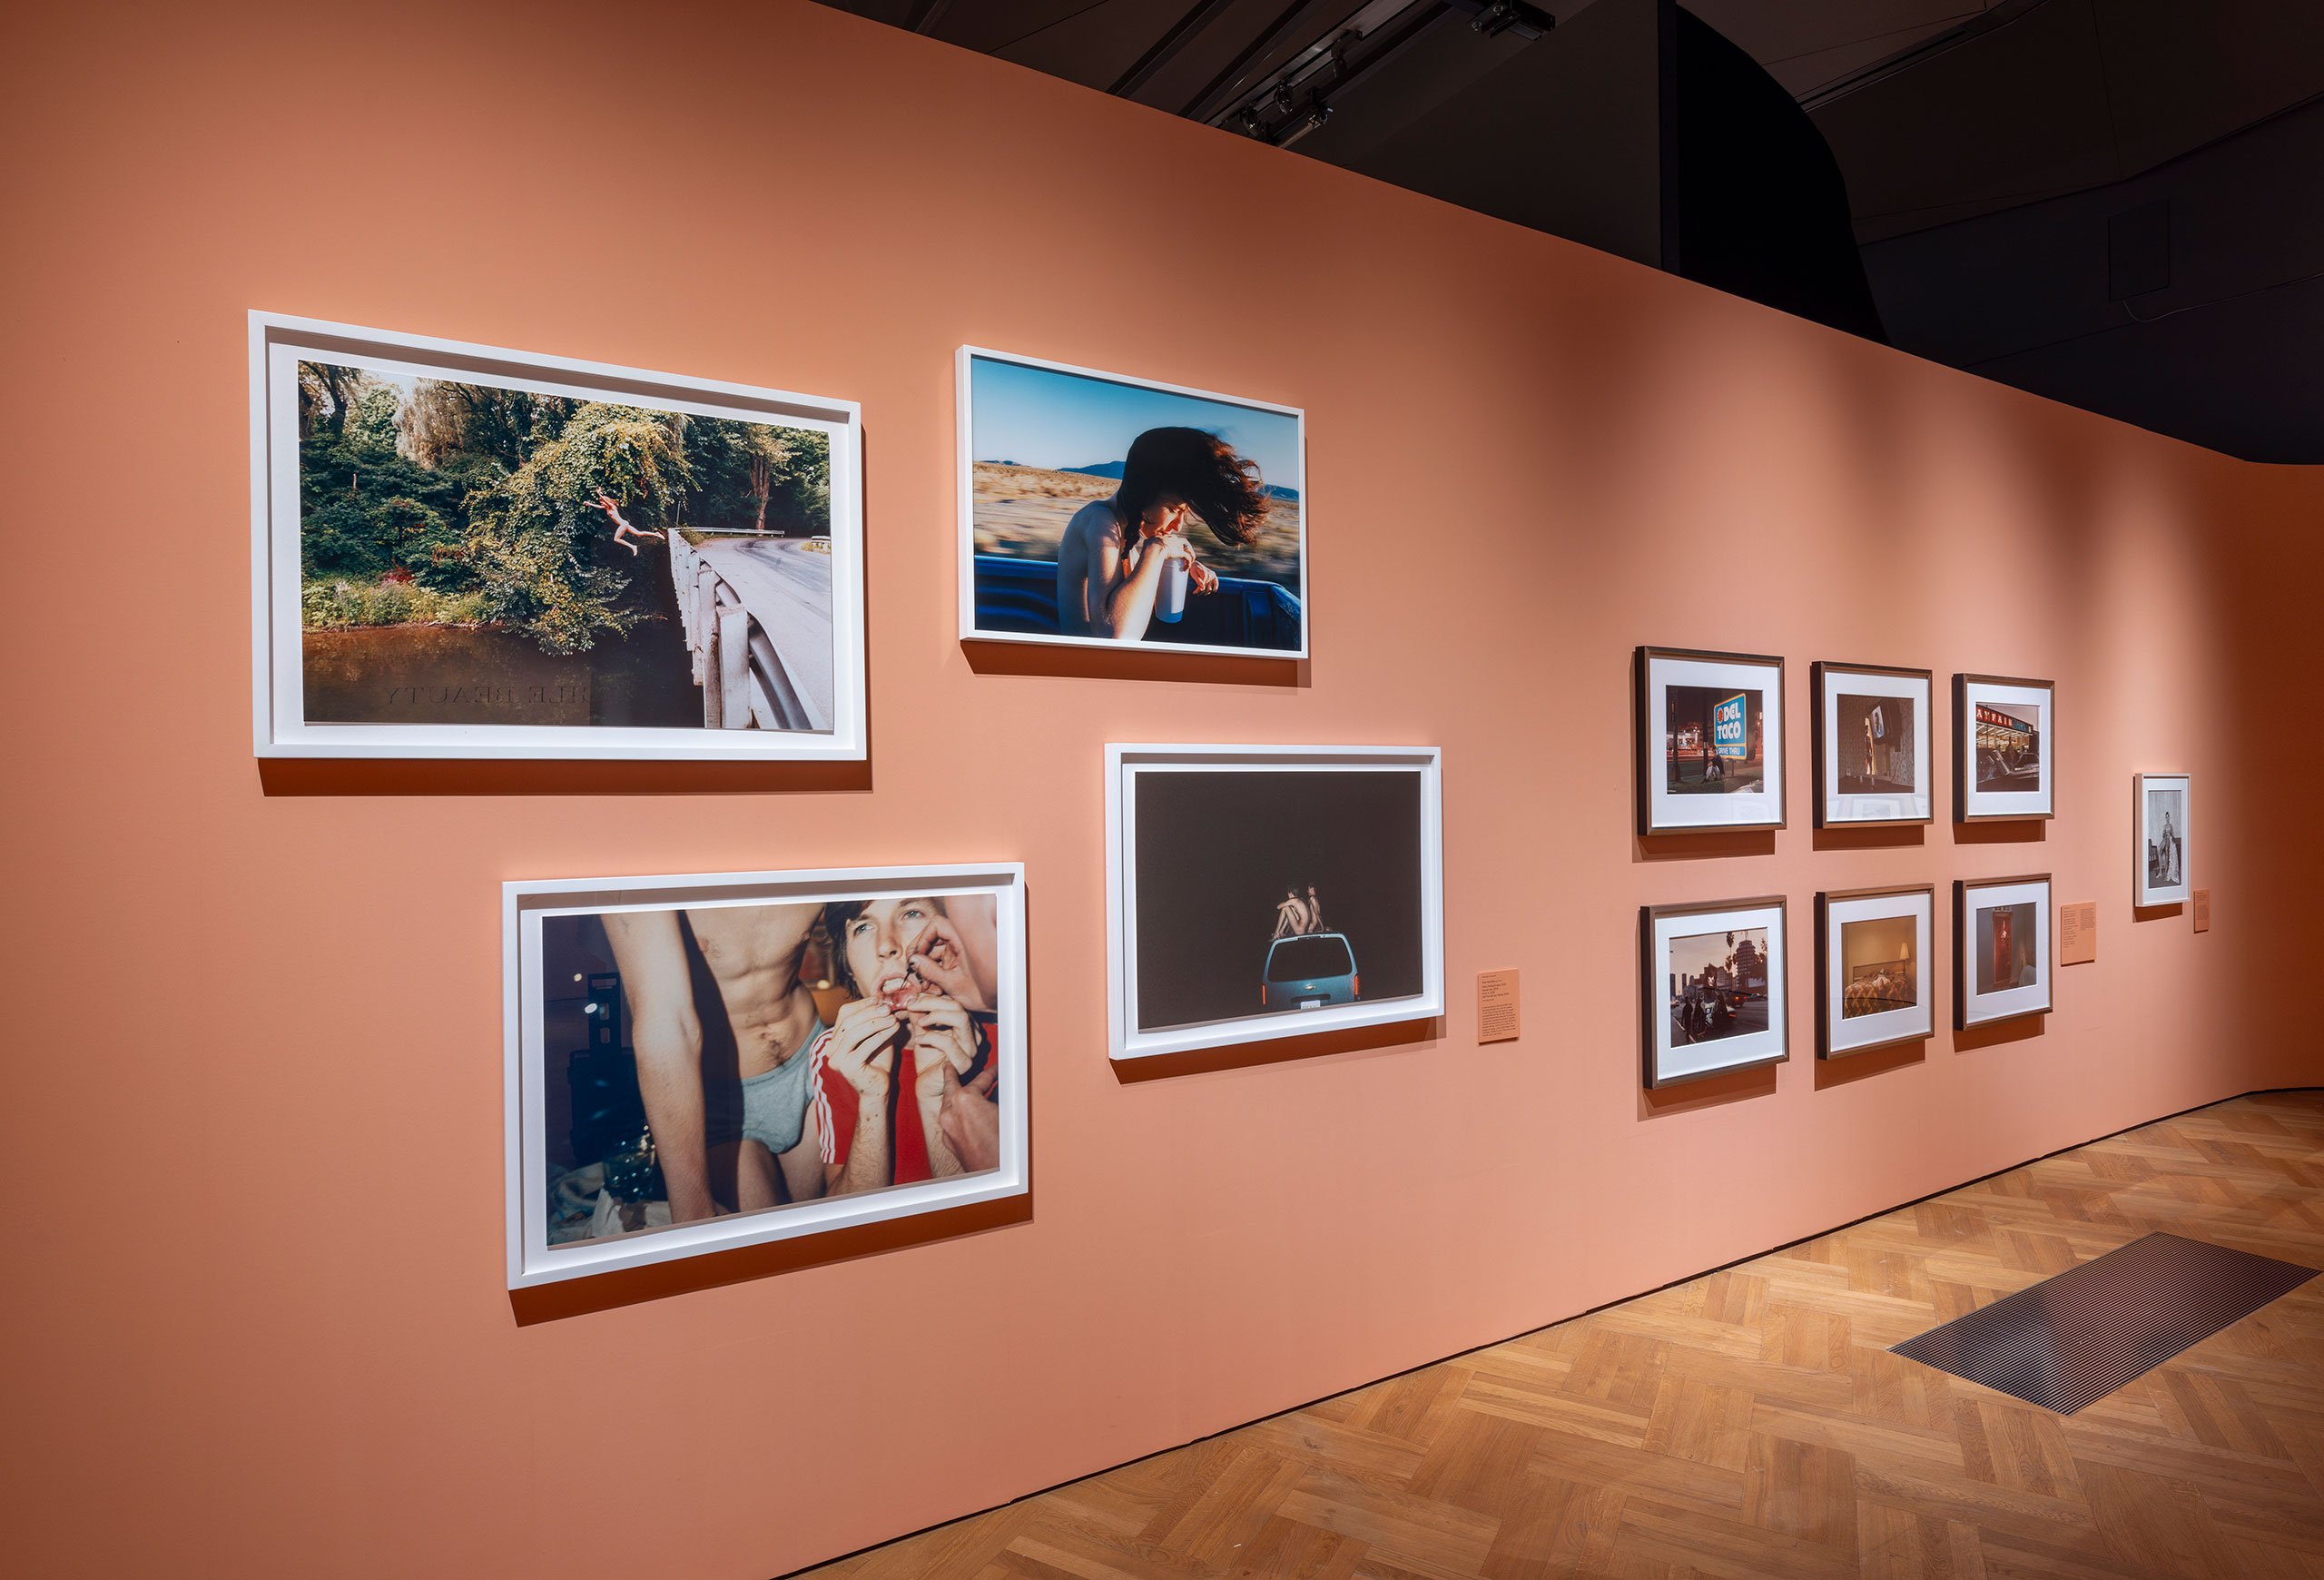 Installation view of "Fragile Beauty" at V&amp;A, South Kensington.
© Victoria and Albert Museum, London.